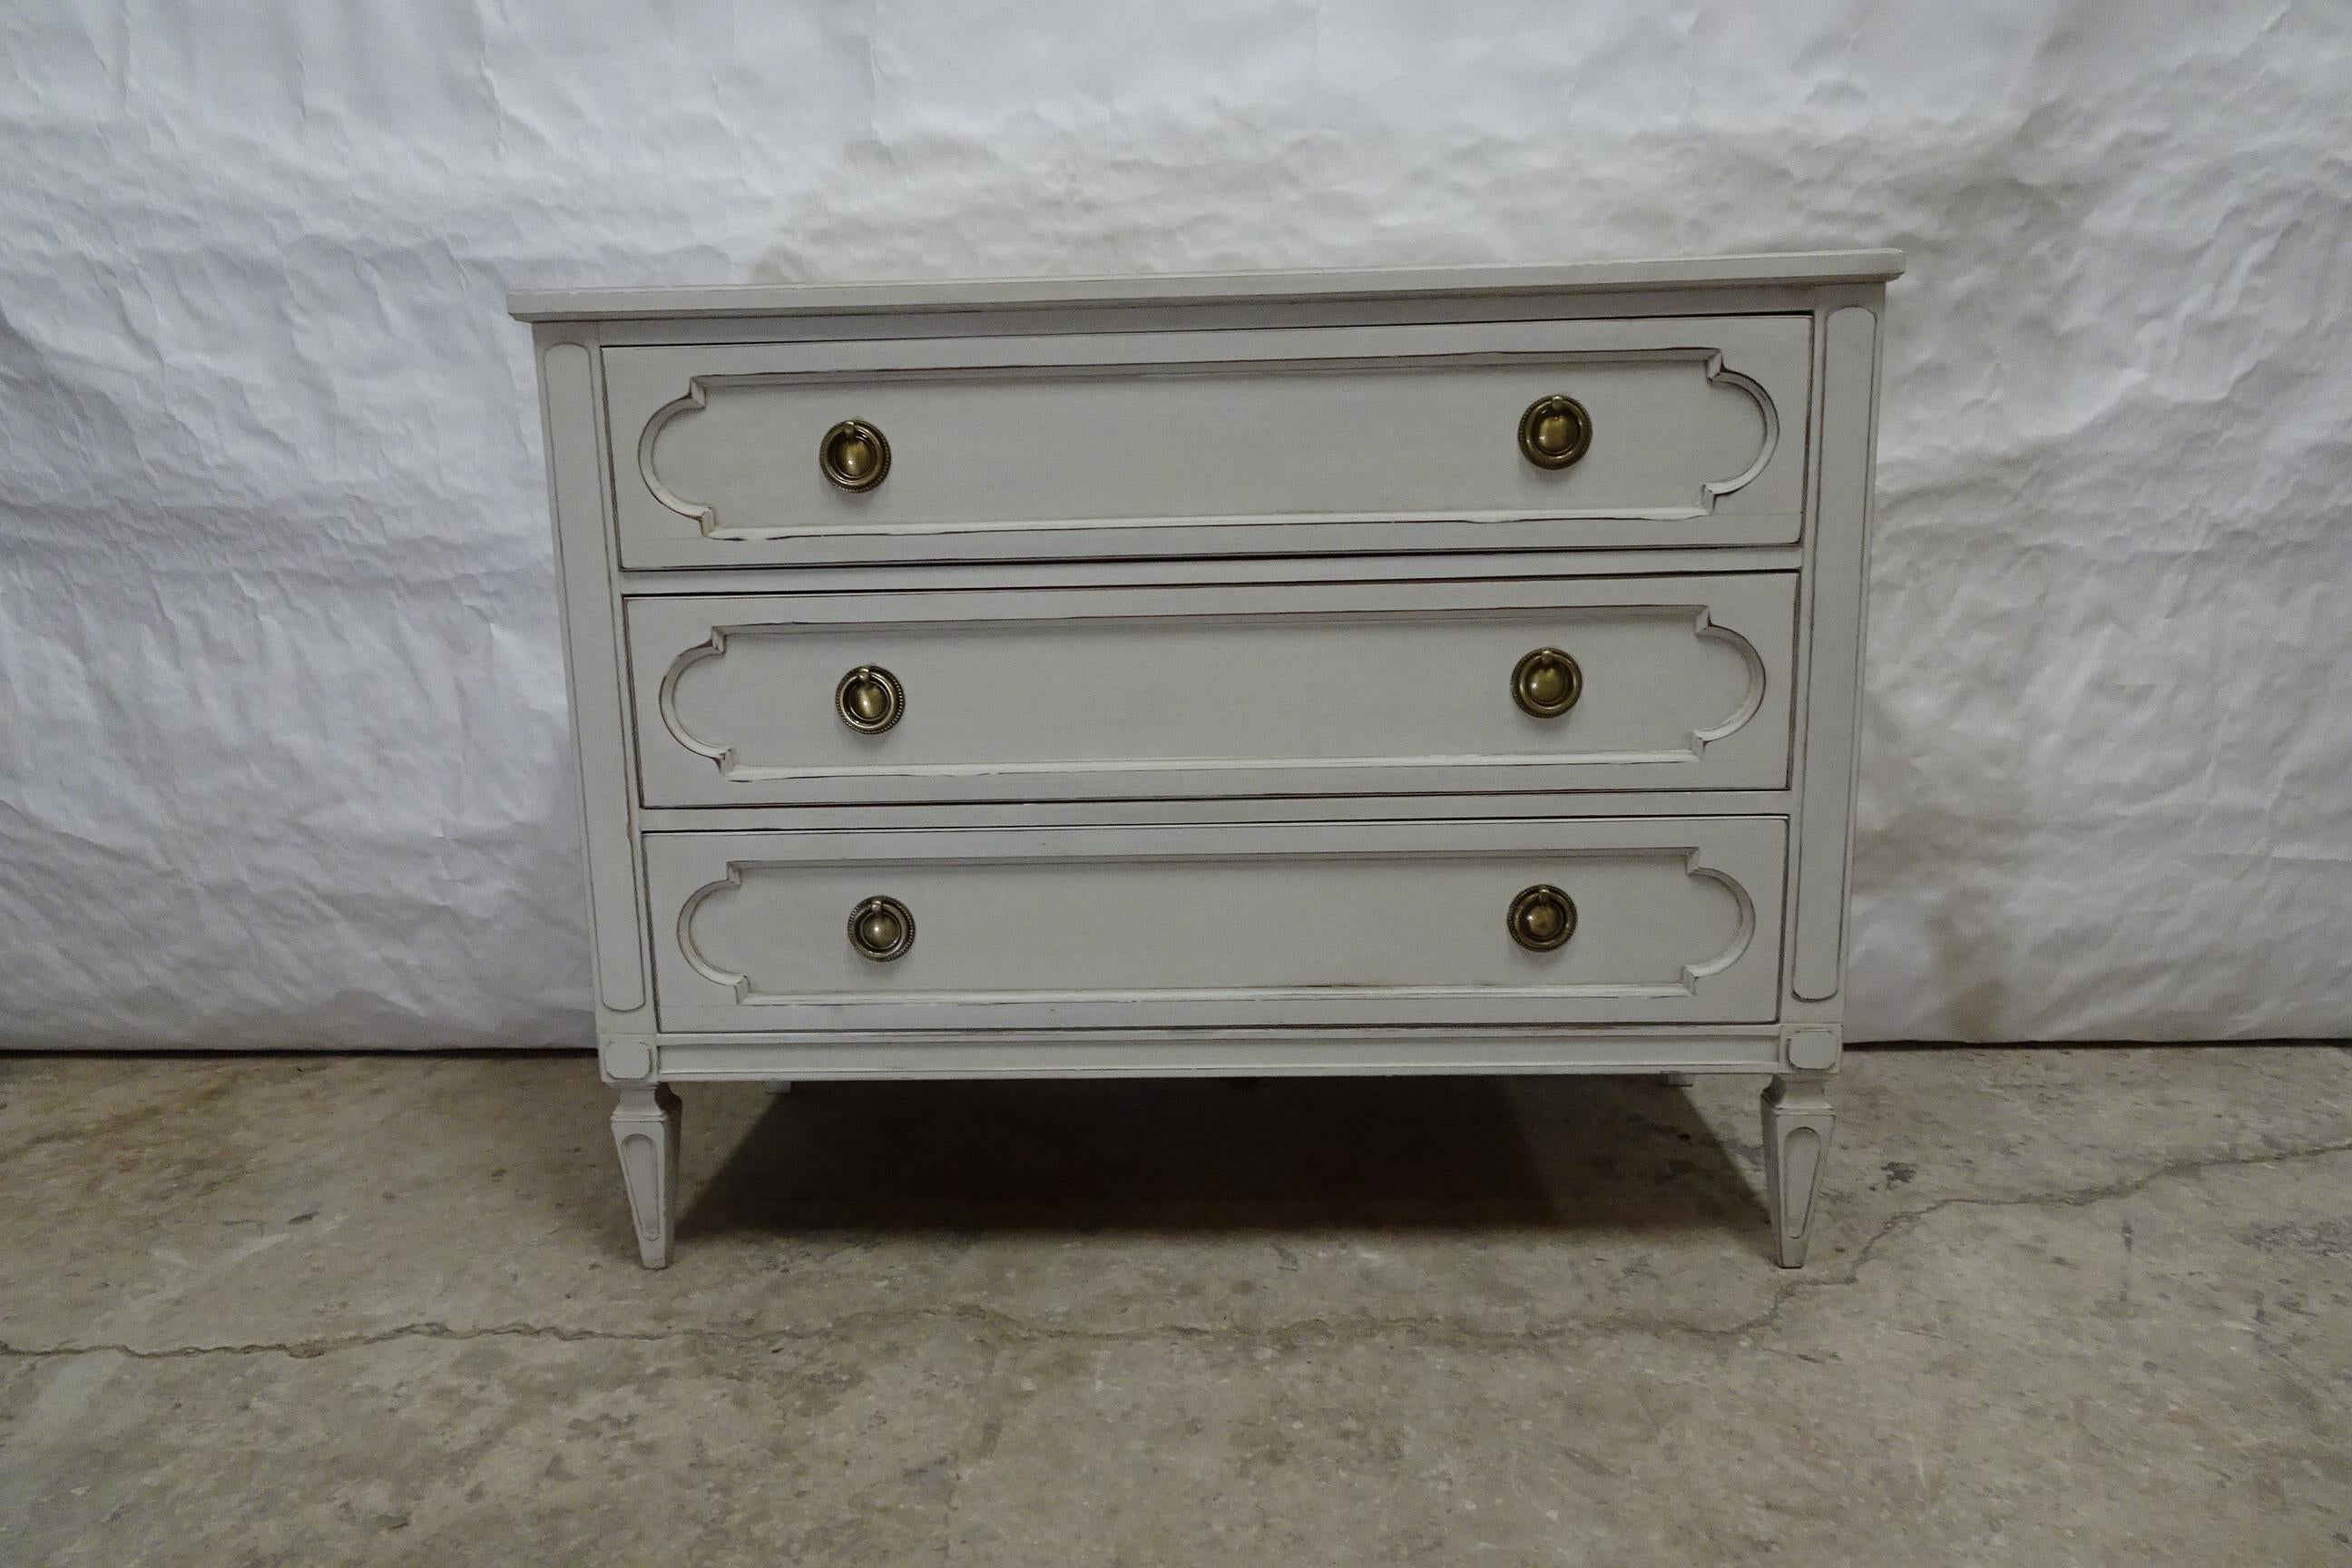 This is a Gustavian Style Unique 3 Drawer Chest Of Drawers. Its been restored and repainted with Milk Paints 